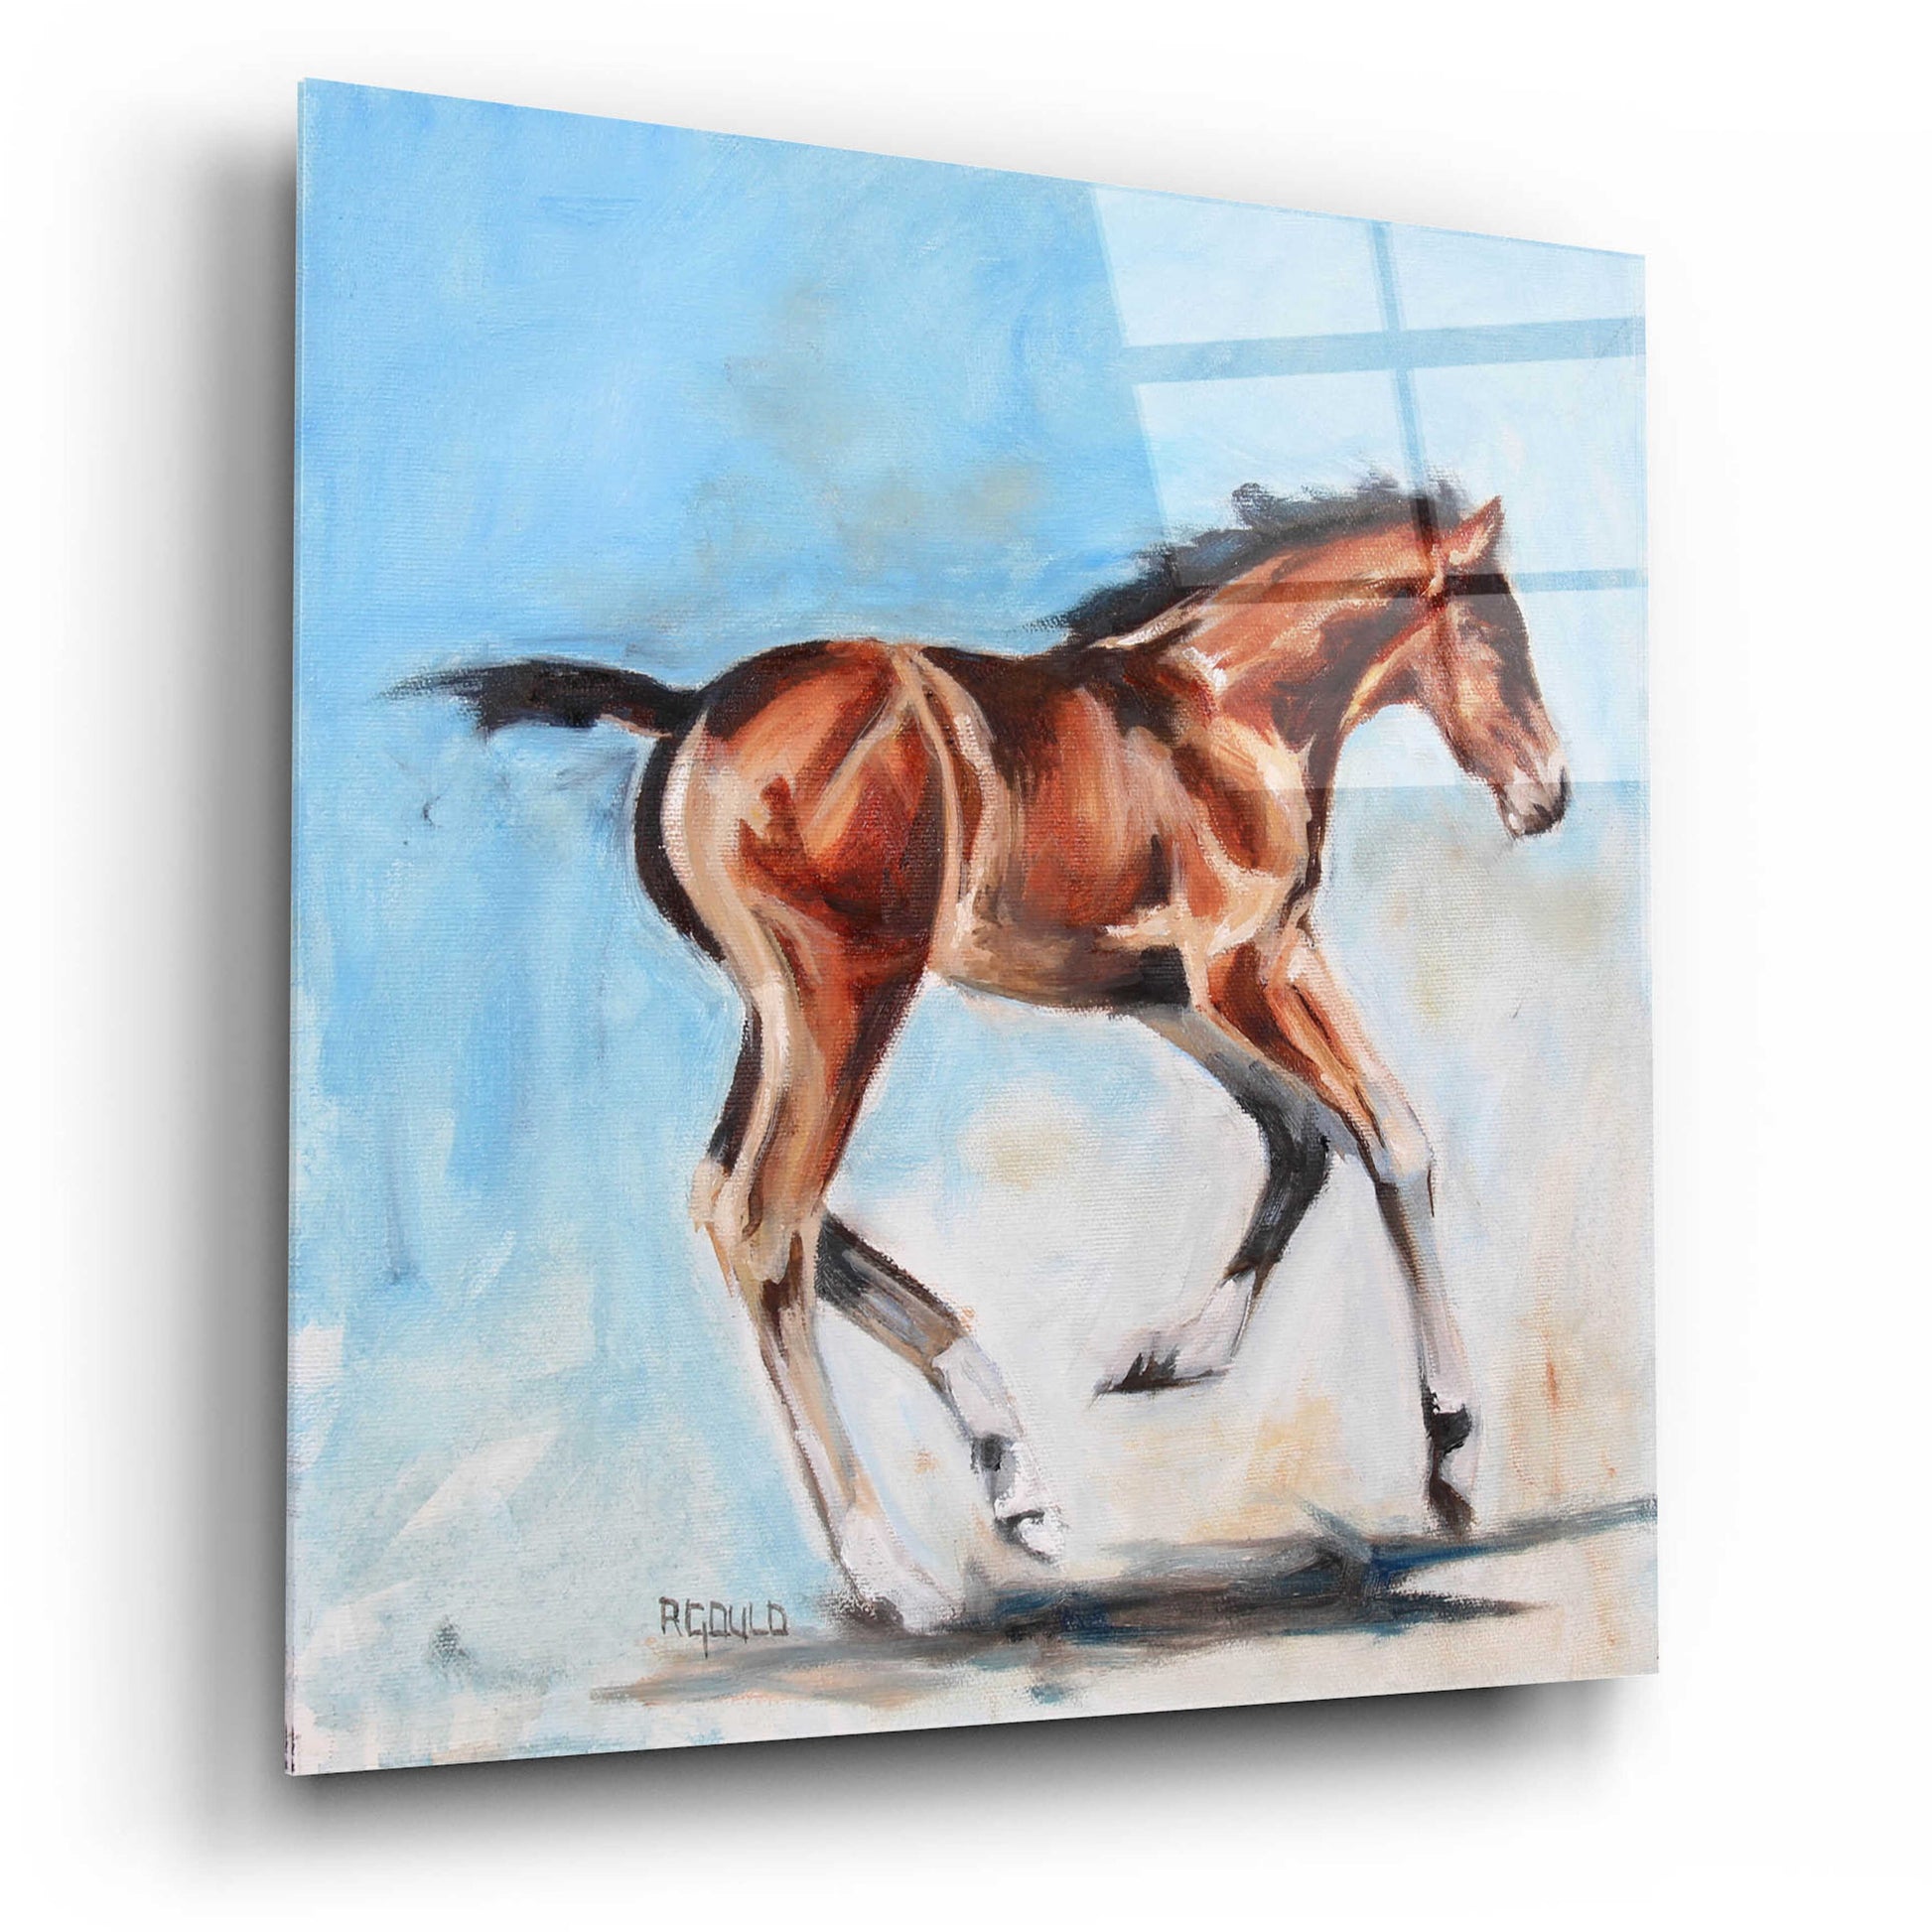 Epic Art 'On The Move' by Renee Gould, Acrylic Glass Wall Art,12x12